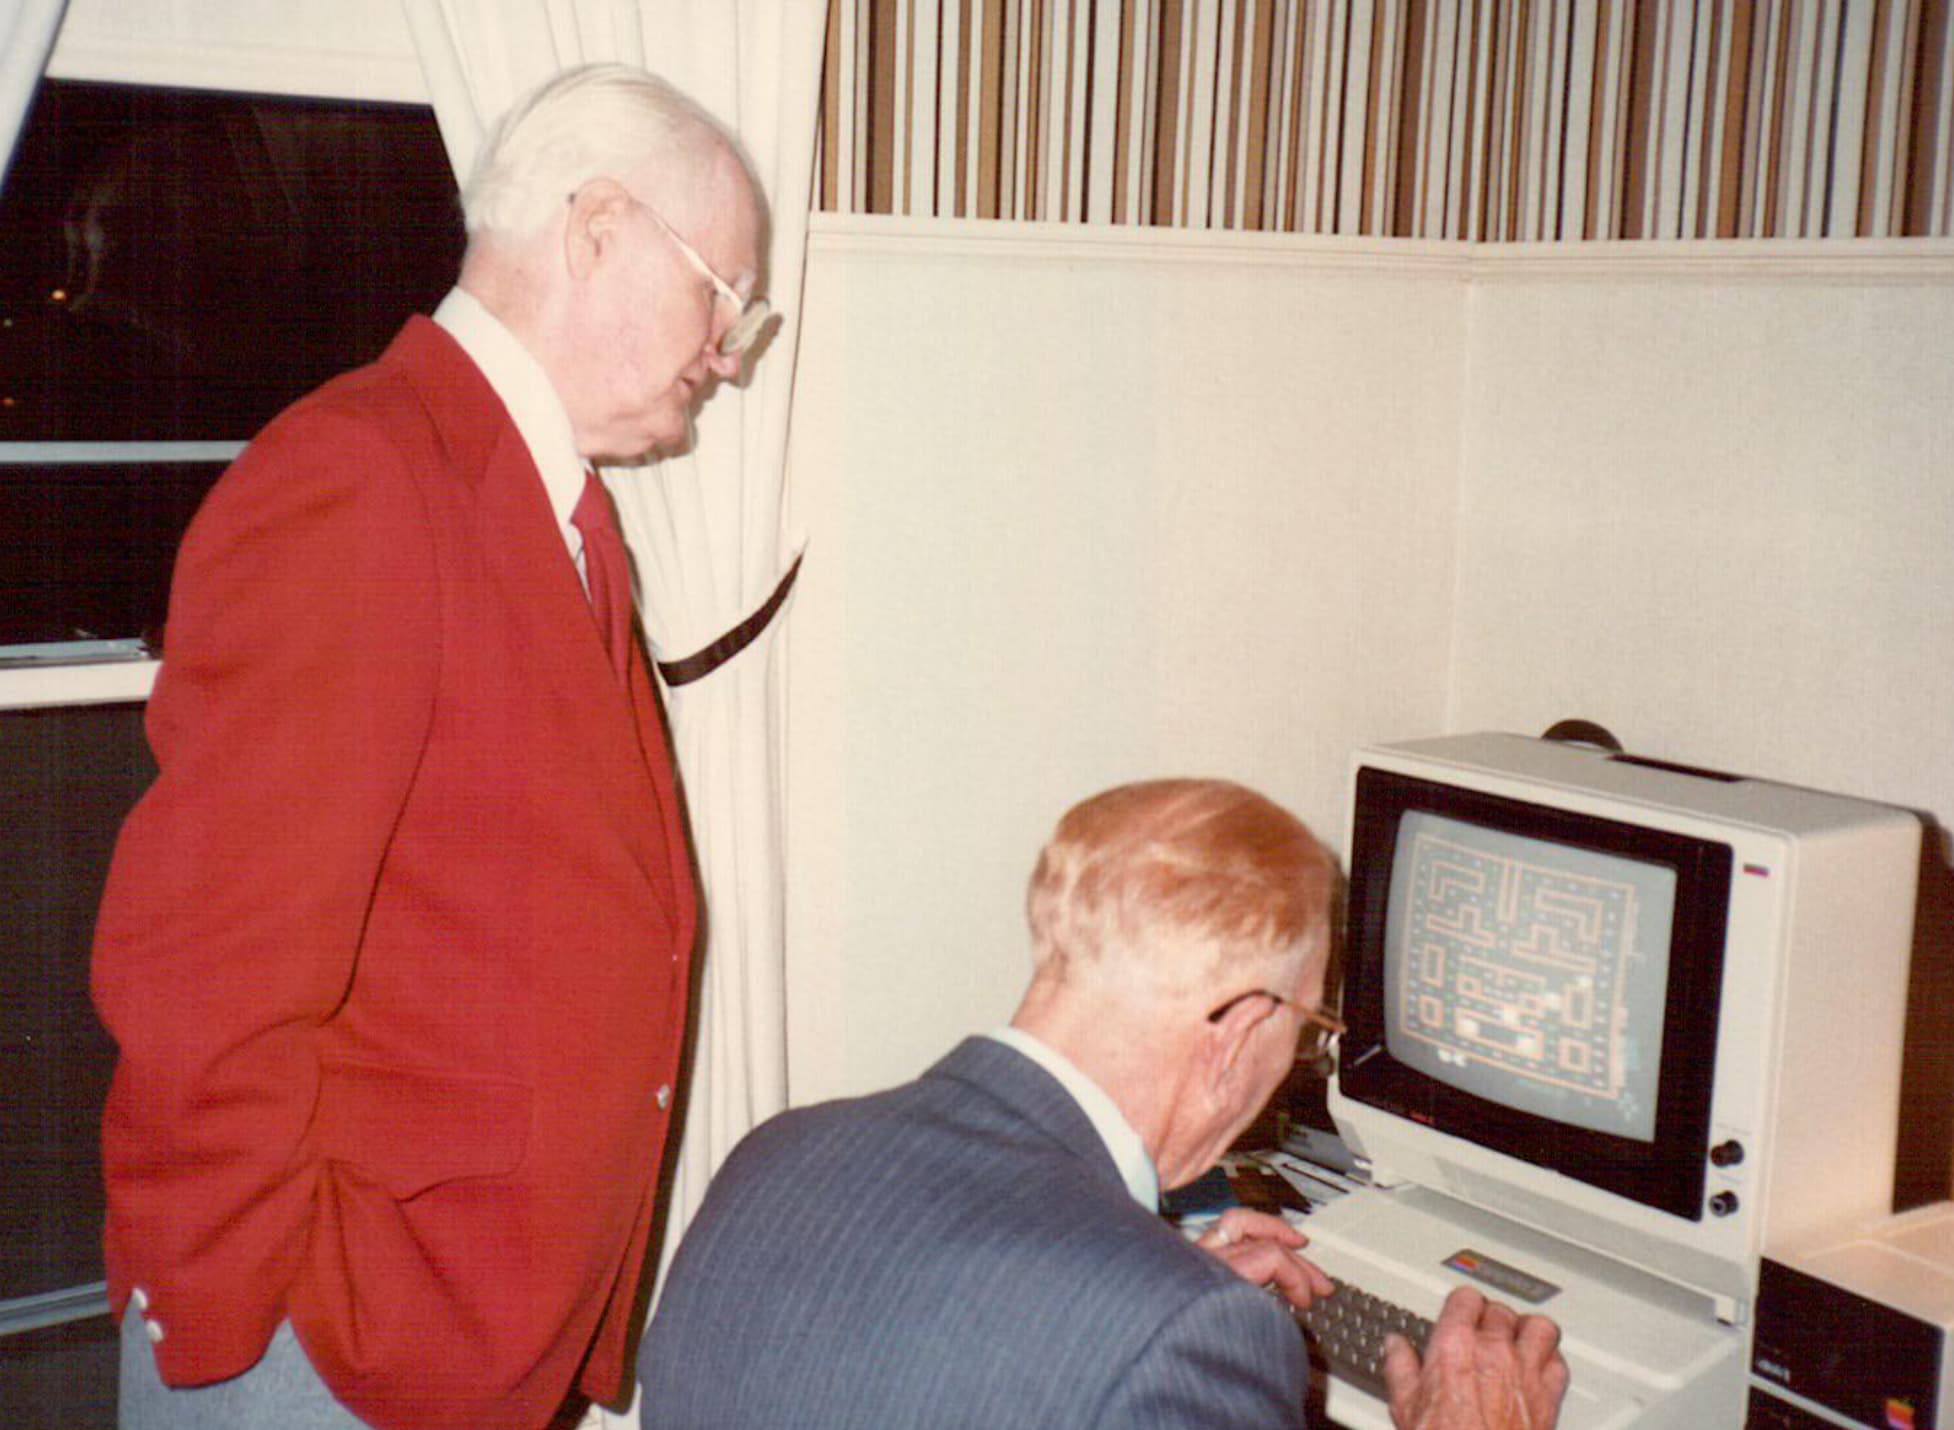 “Grandpa trying out Pac-Man while my other grandpa looks on, 1982.”